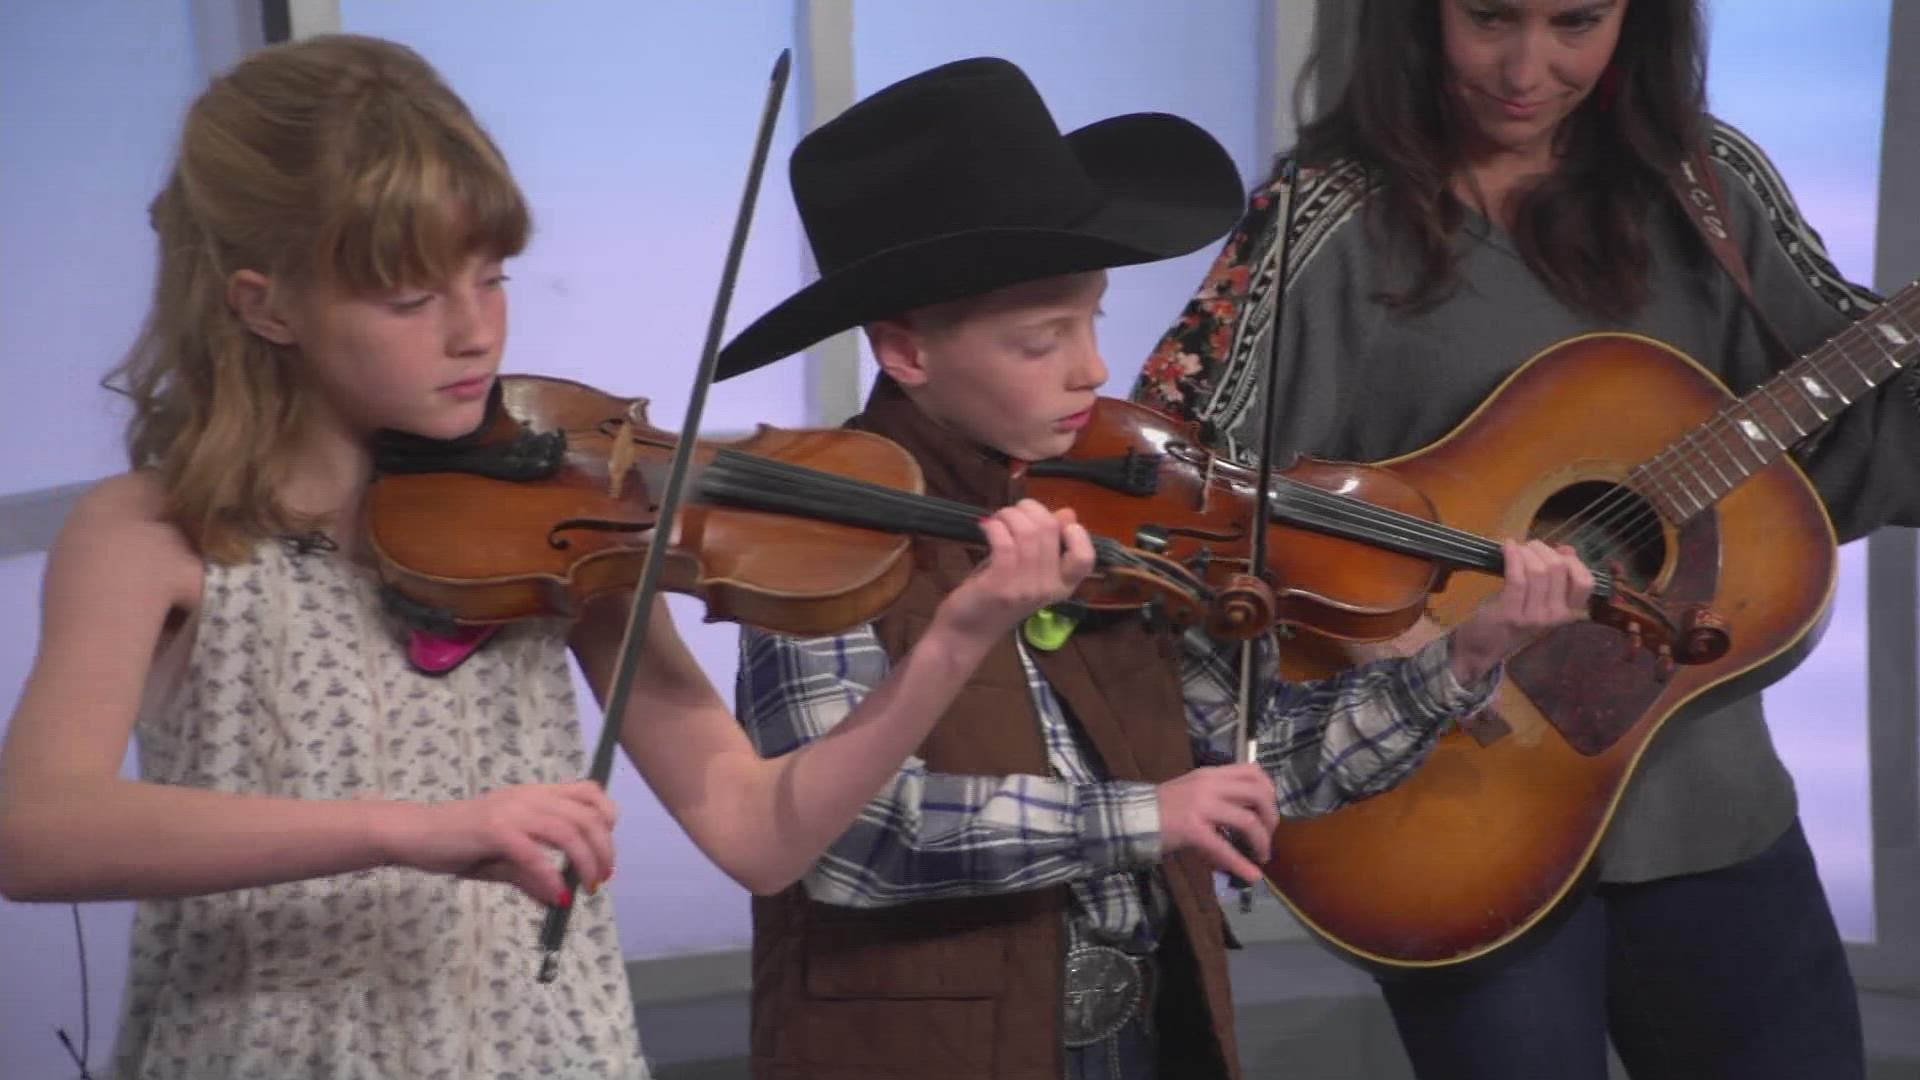 Some of the fiddlers who competed in the Colorado Fiddle Championships at the National Western Stock Show last weekend joined 9NEWS to talk about the experience.